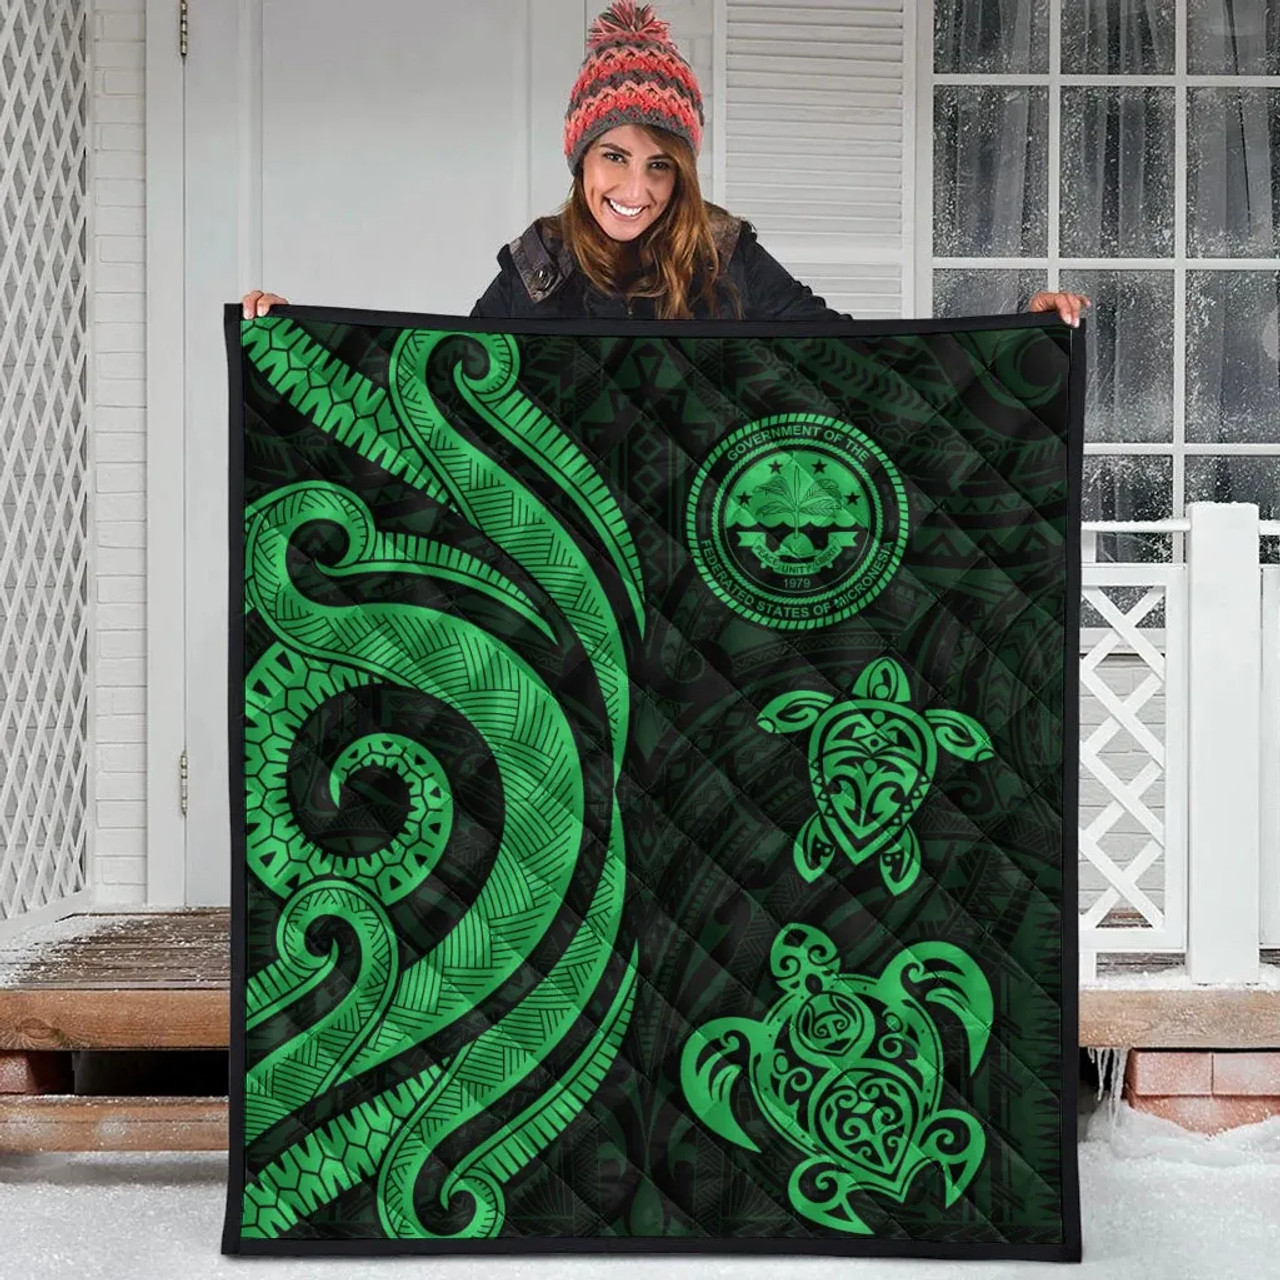 Federated States of Micronesia Premium Quilt - Green Tentacle Turtle 10